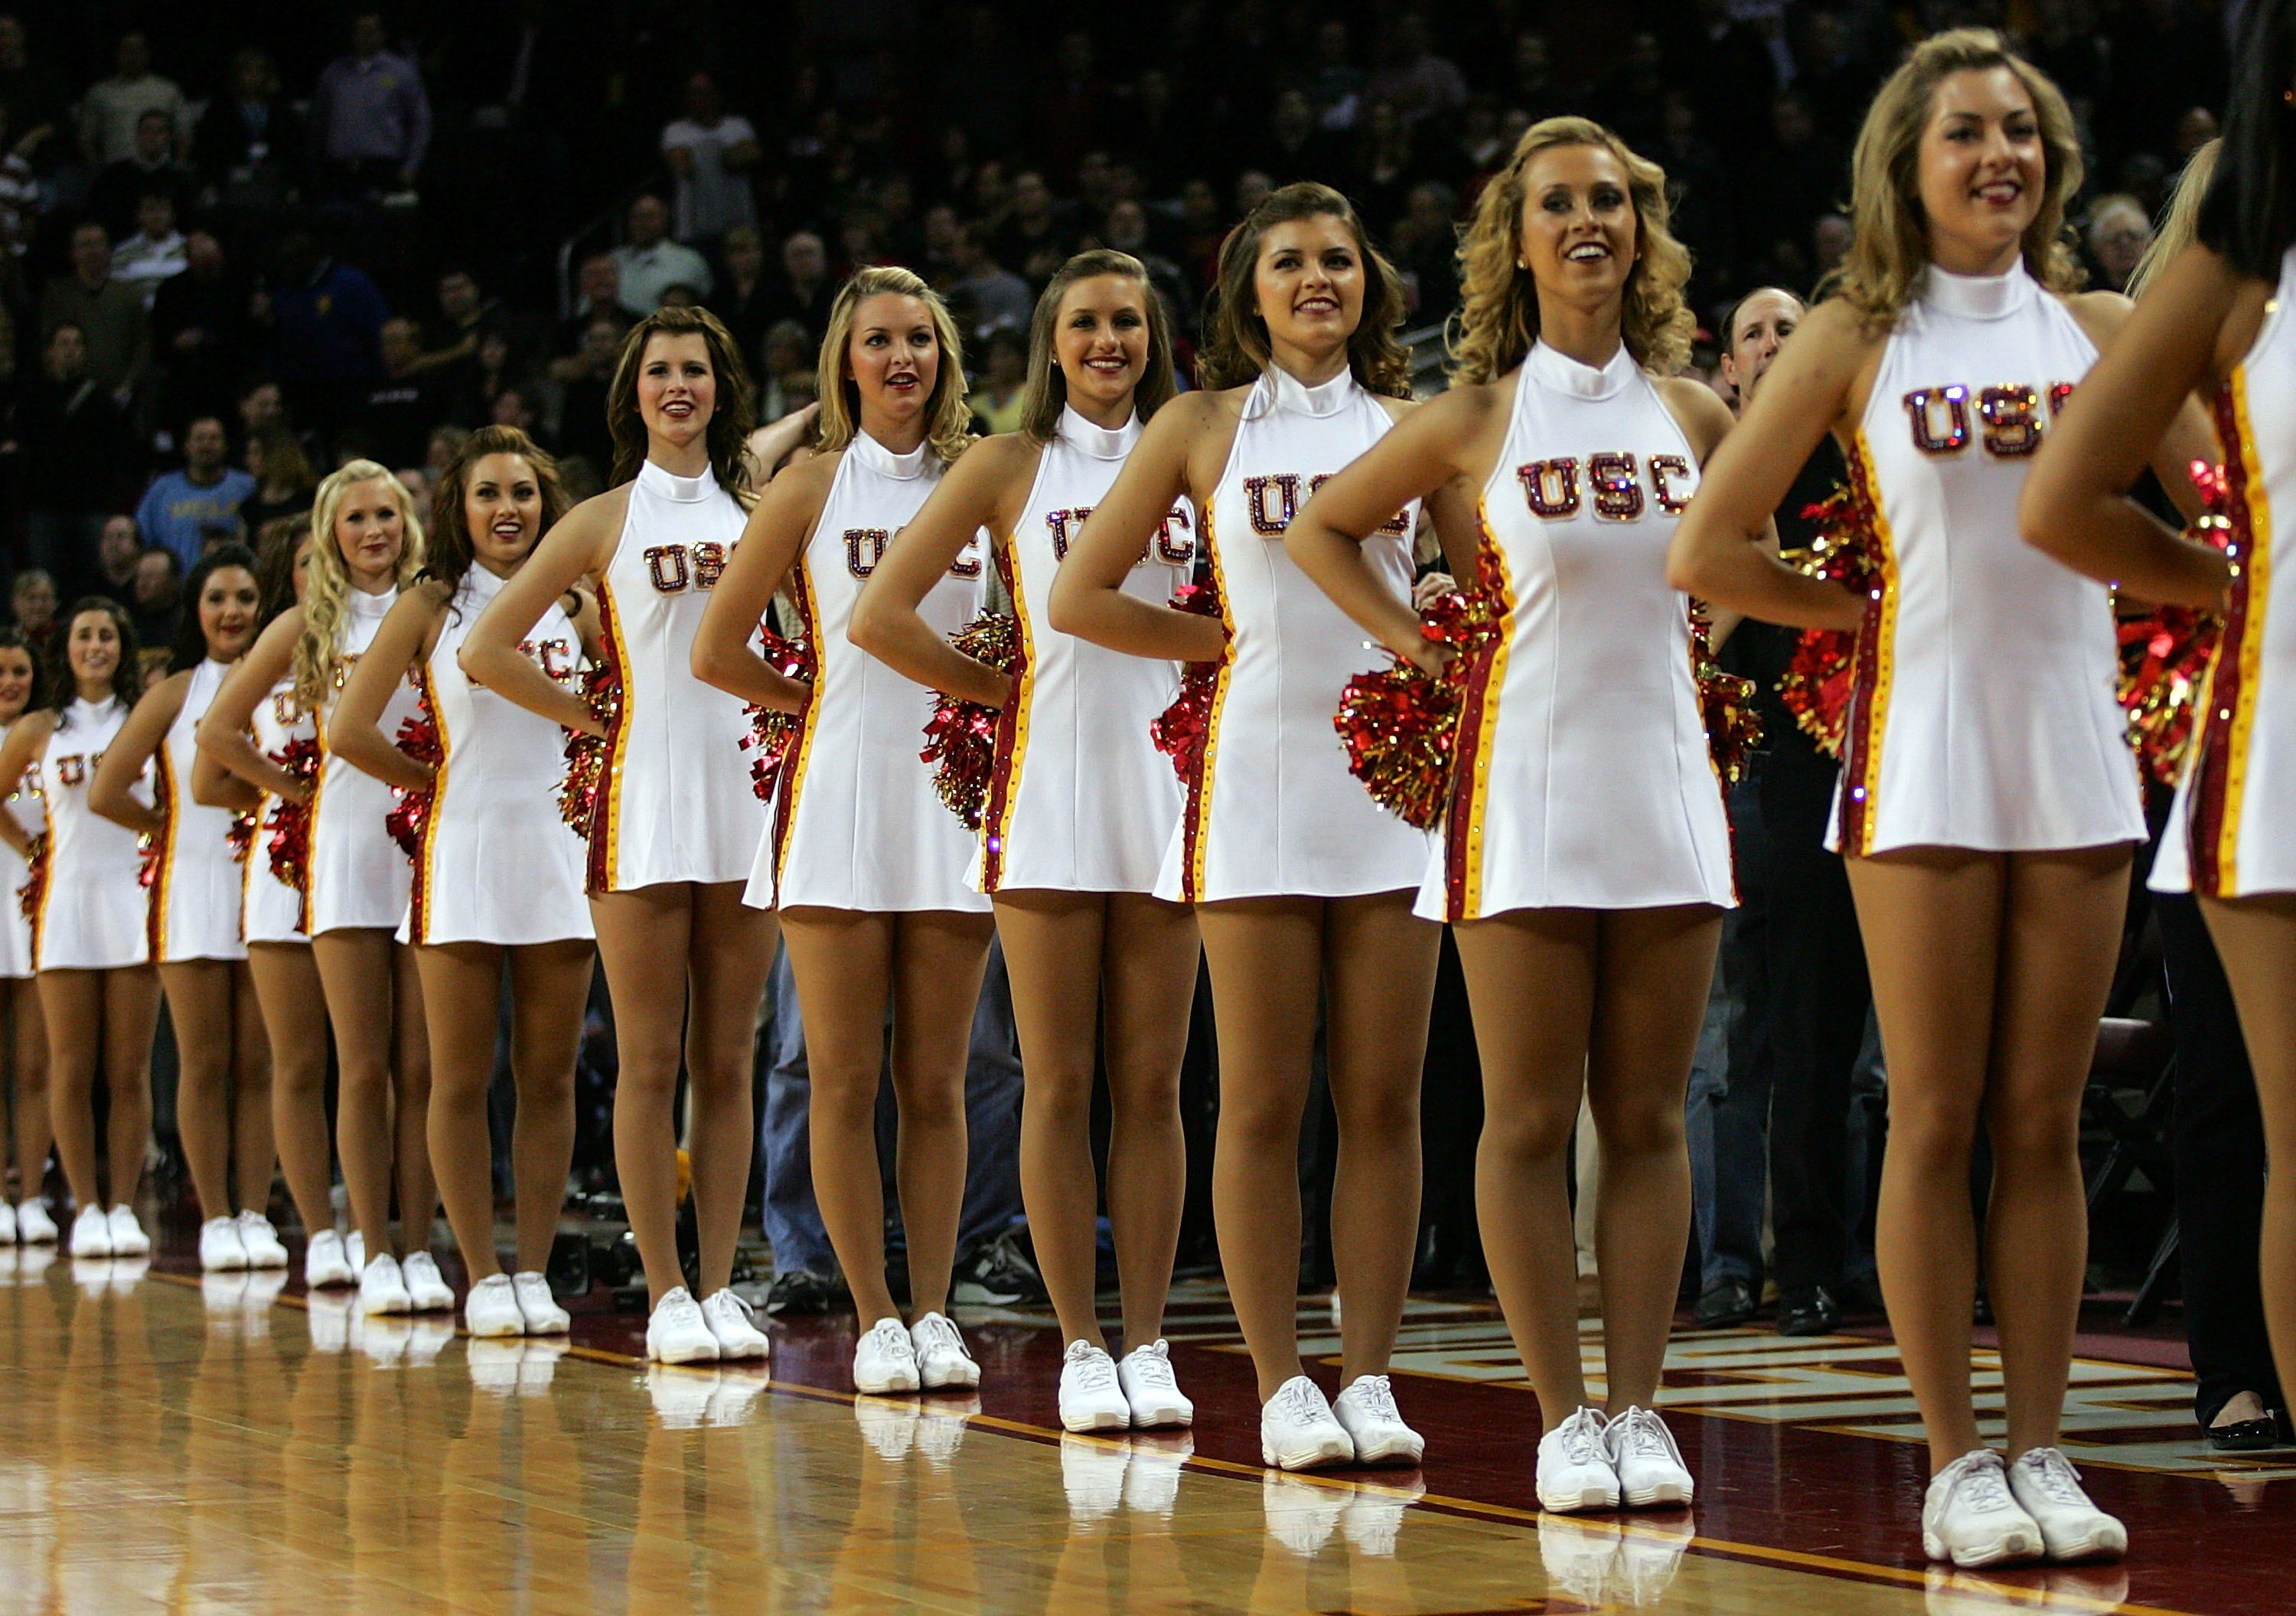 los angeles ca february 17 the usc trojans cheerleaders line up at ...